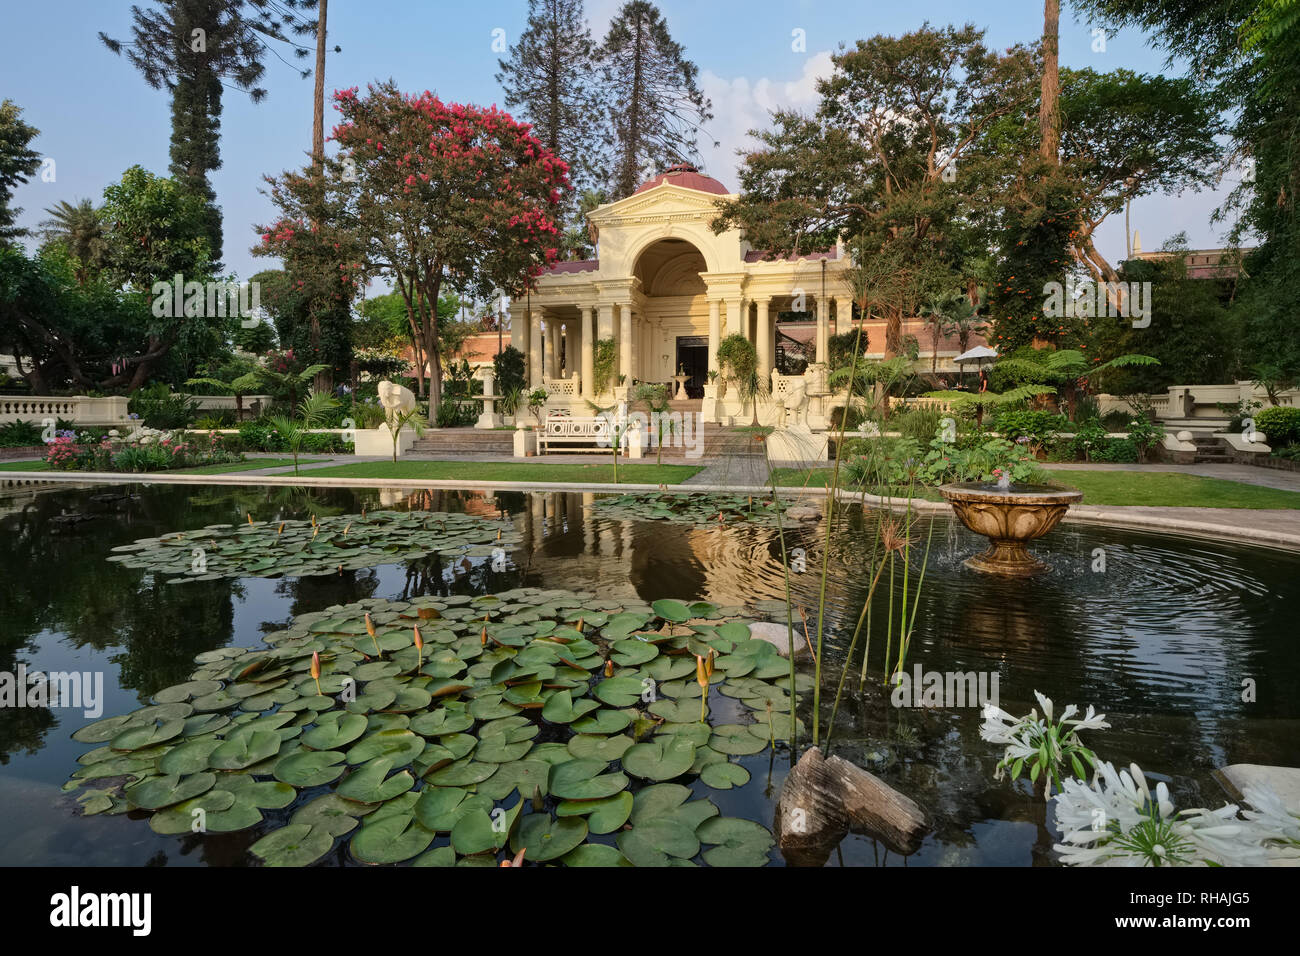 A pavilion and lotus pond at the Garden of Dreams in Thamel, Kathmandu, Nepal Stock Photo